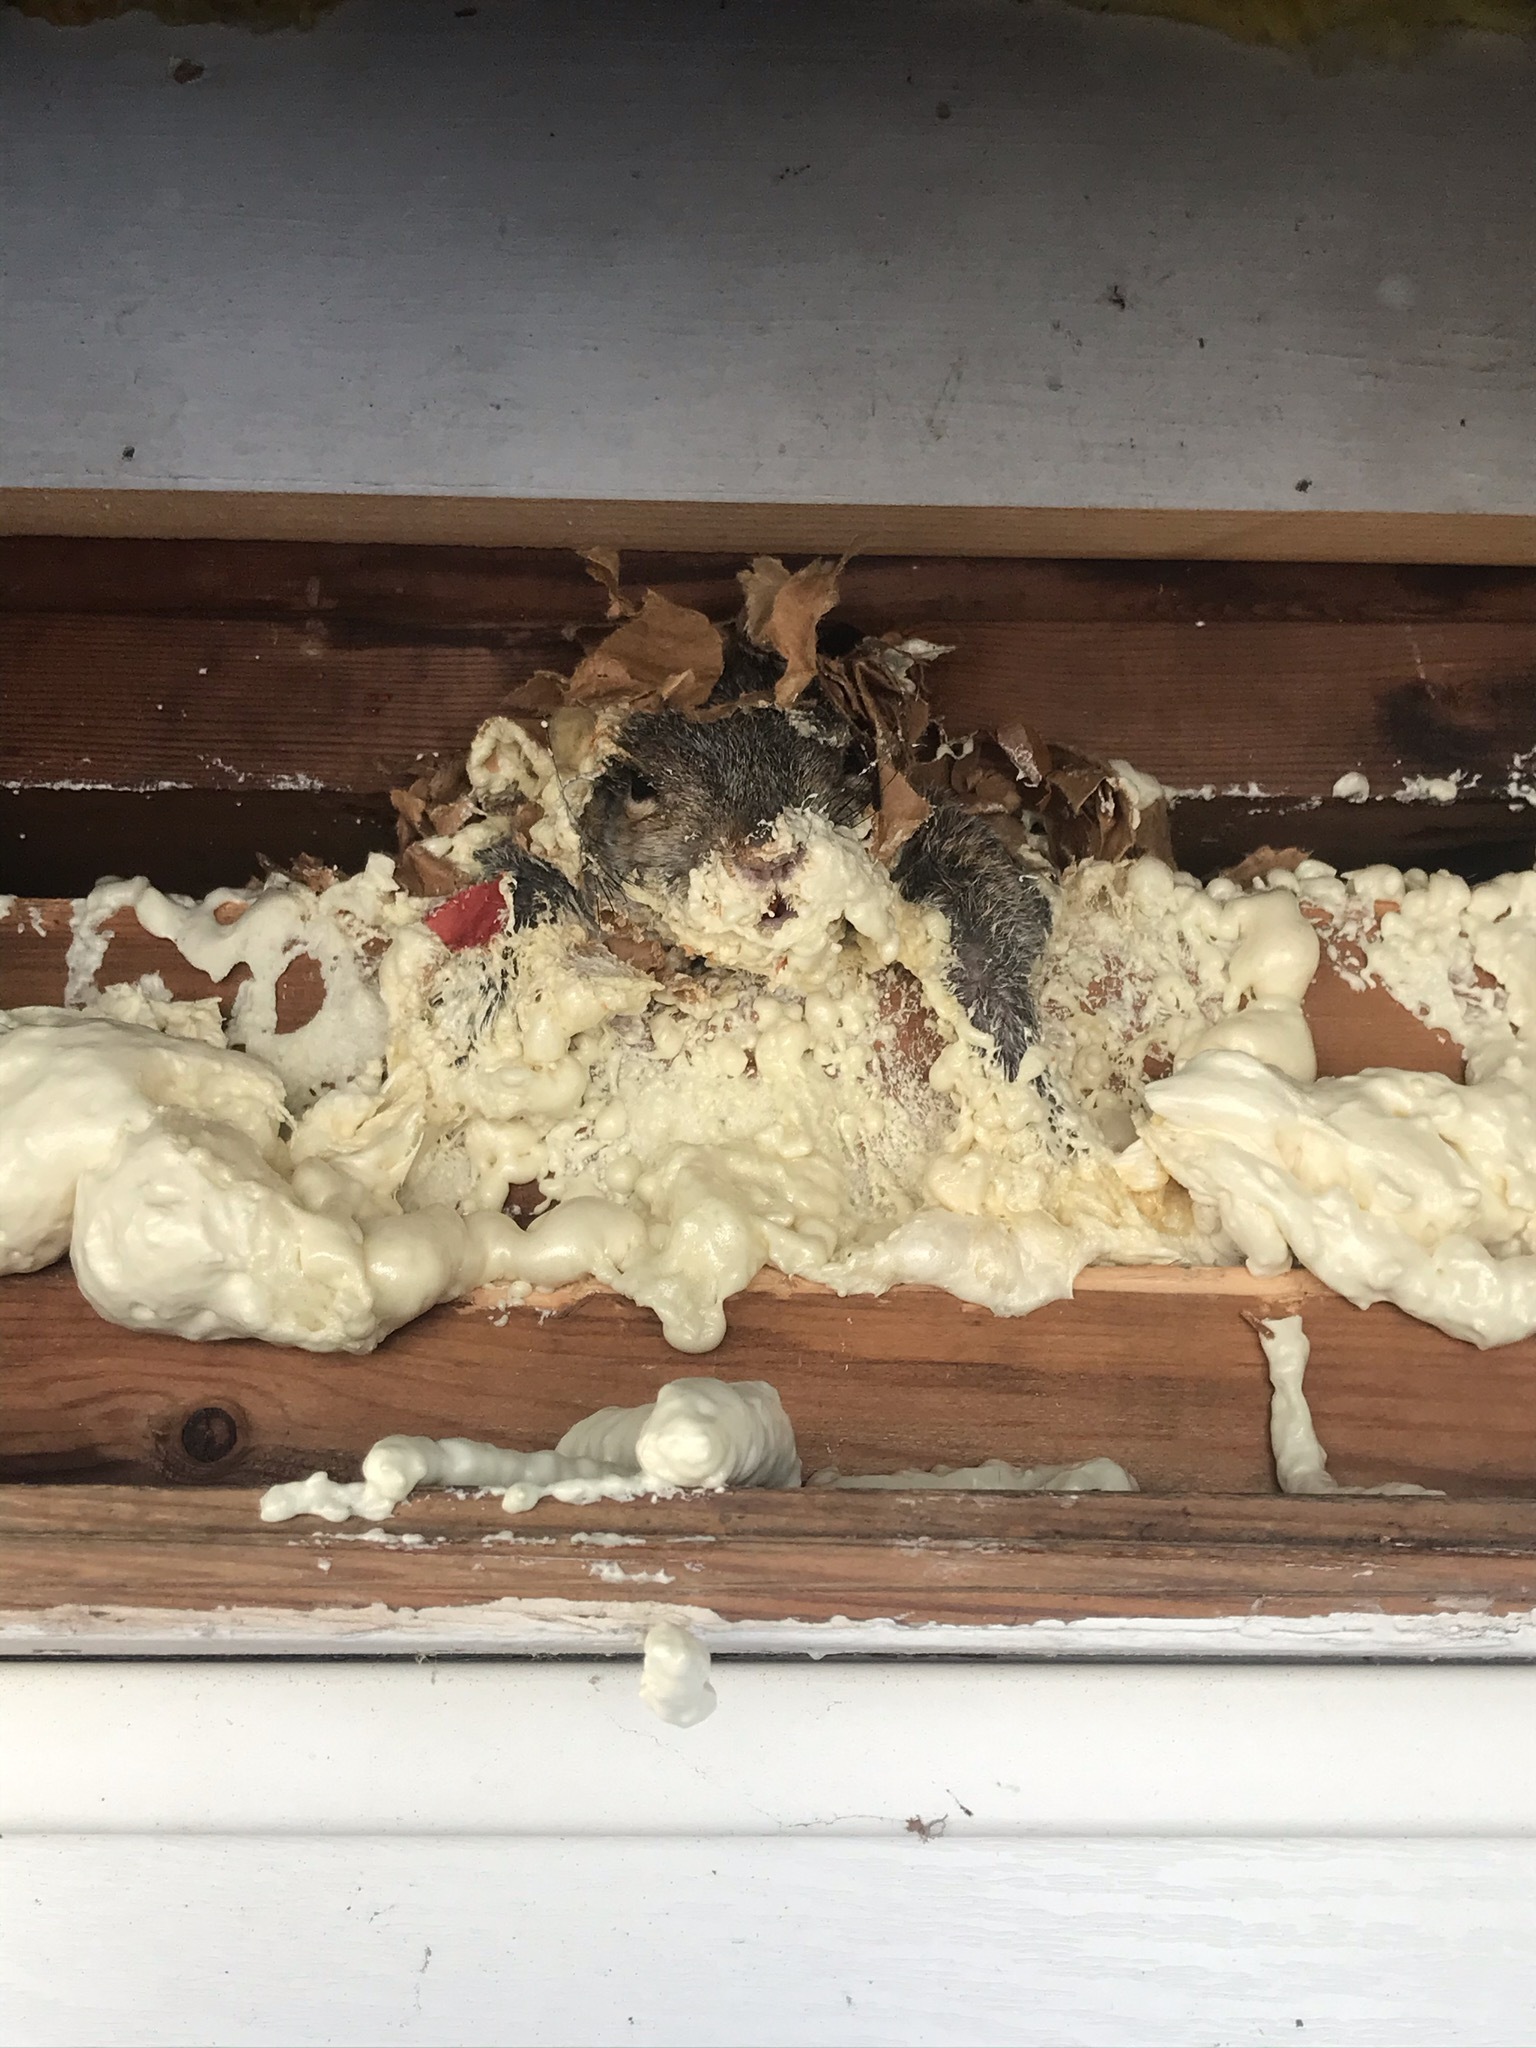 The squirrel when she was found: trapped in spray foam and stuck to the board.